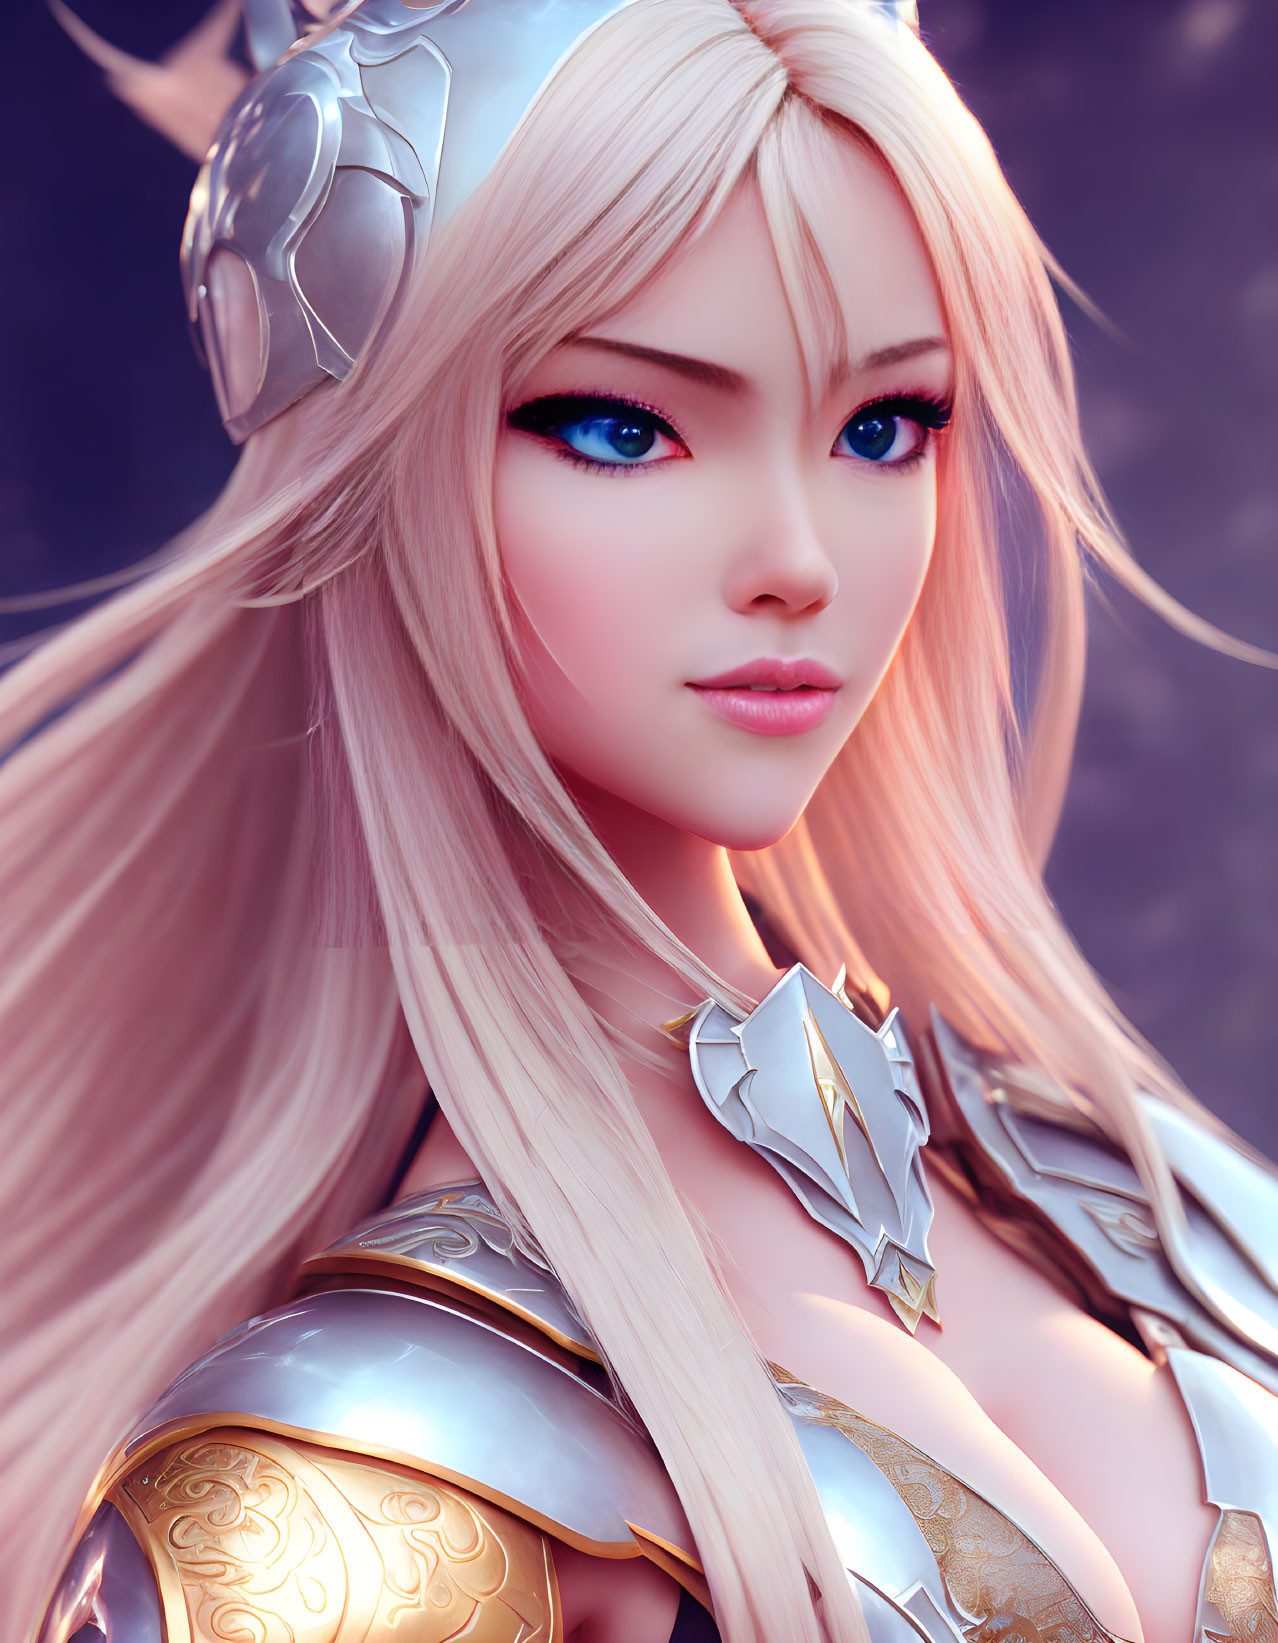 Digital artwork of female character in ornate silver and gold armor